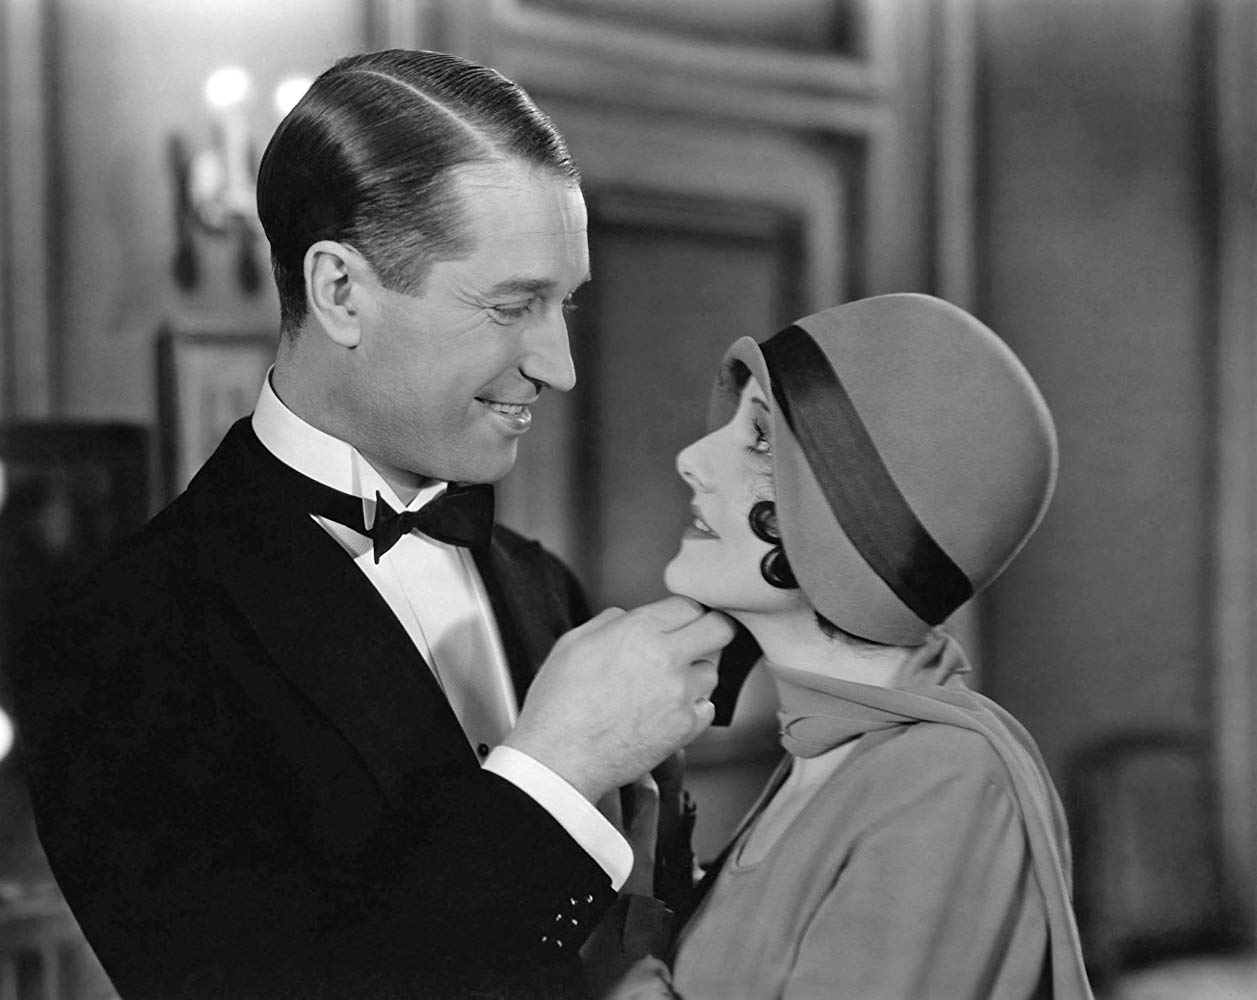 Louise [Sung by Maurice Chevalier in the Paramount Production of